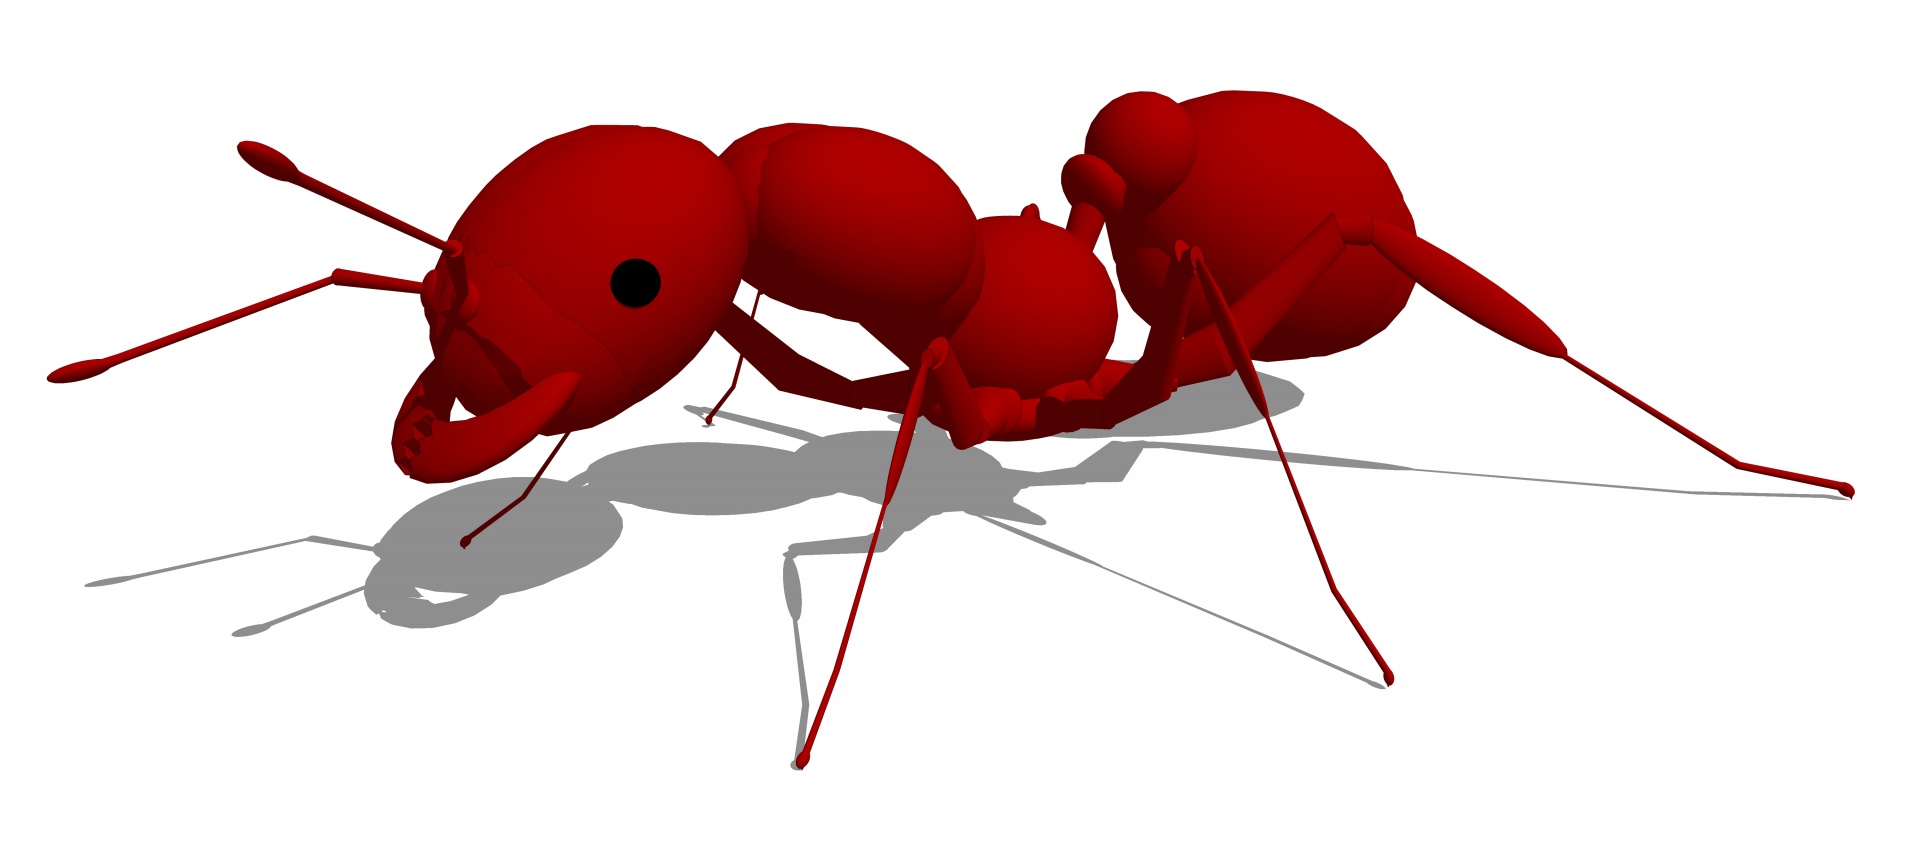 3d drawing of a red ant with shadows on white